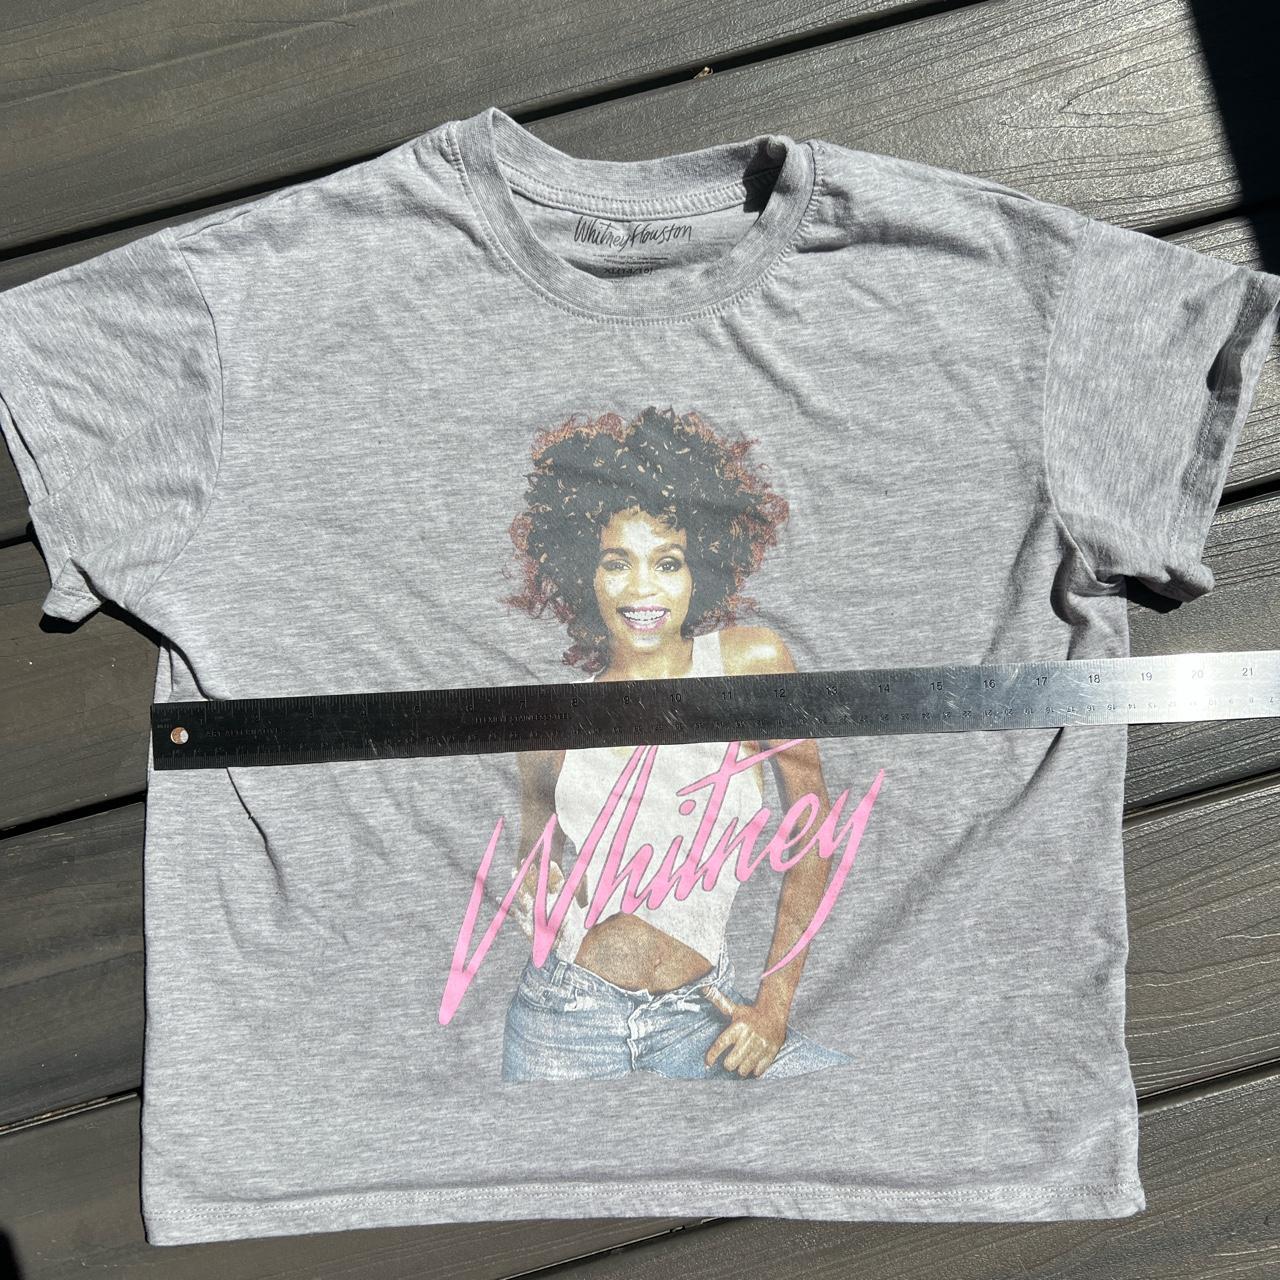 Product Image 3 - #Relaxed Whitney Houston #top

#grey XL